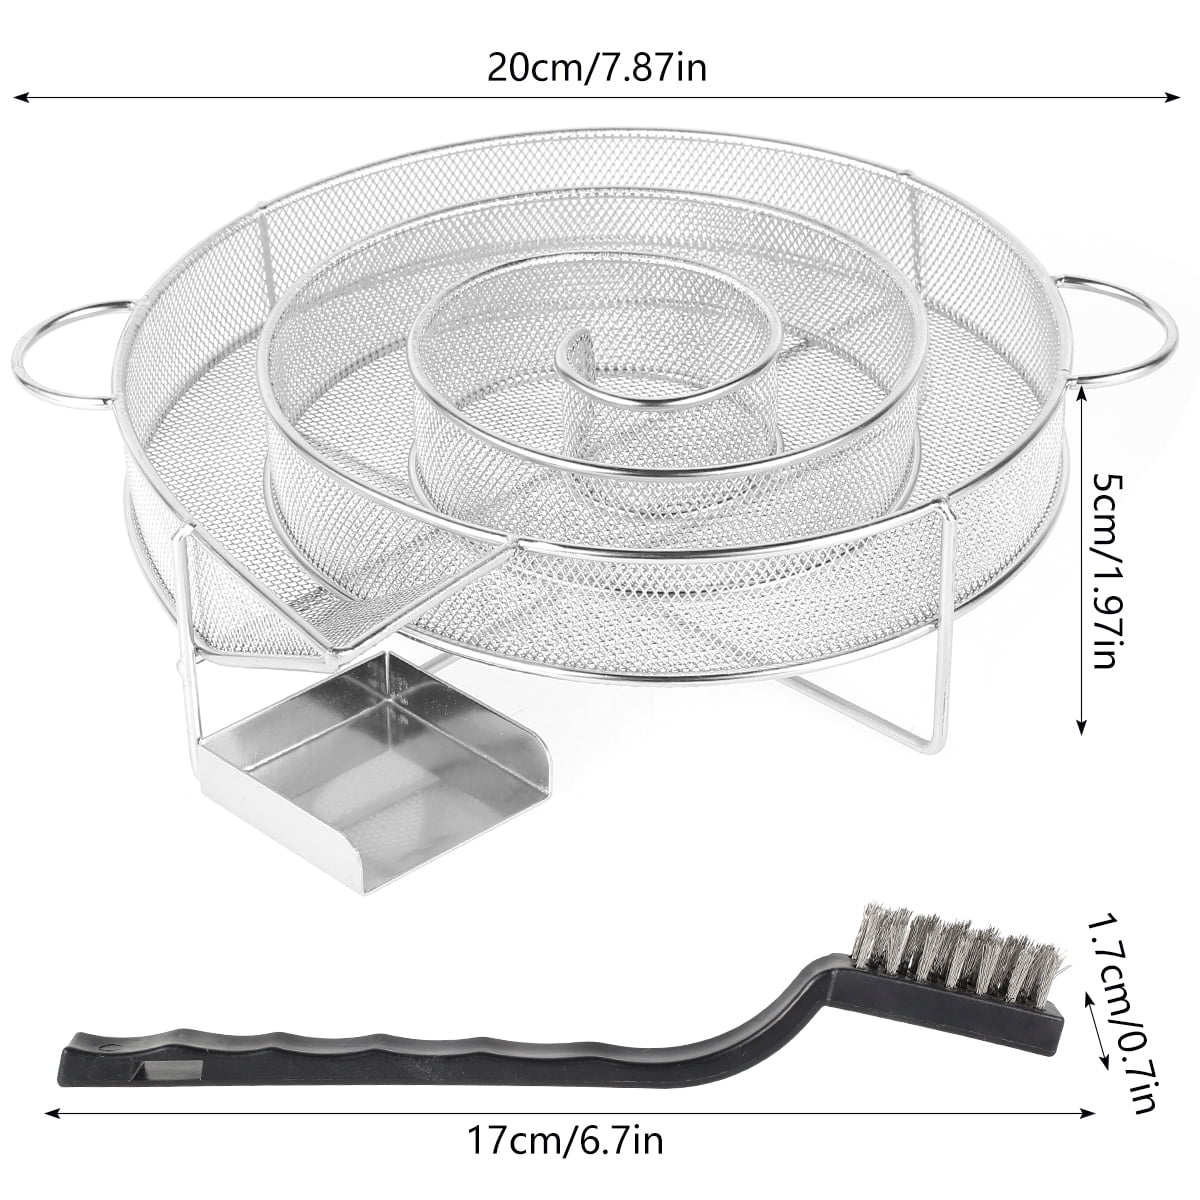 Stainless Steel Smoker Tray with Handle Barbecue Net Smoke Tube Generator Cooking Tool Veggies Hot or Cold Smoking on Any BBQ Grill and Smoker for Meat Fish Cold Smoke Generator Cheese 